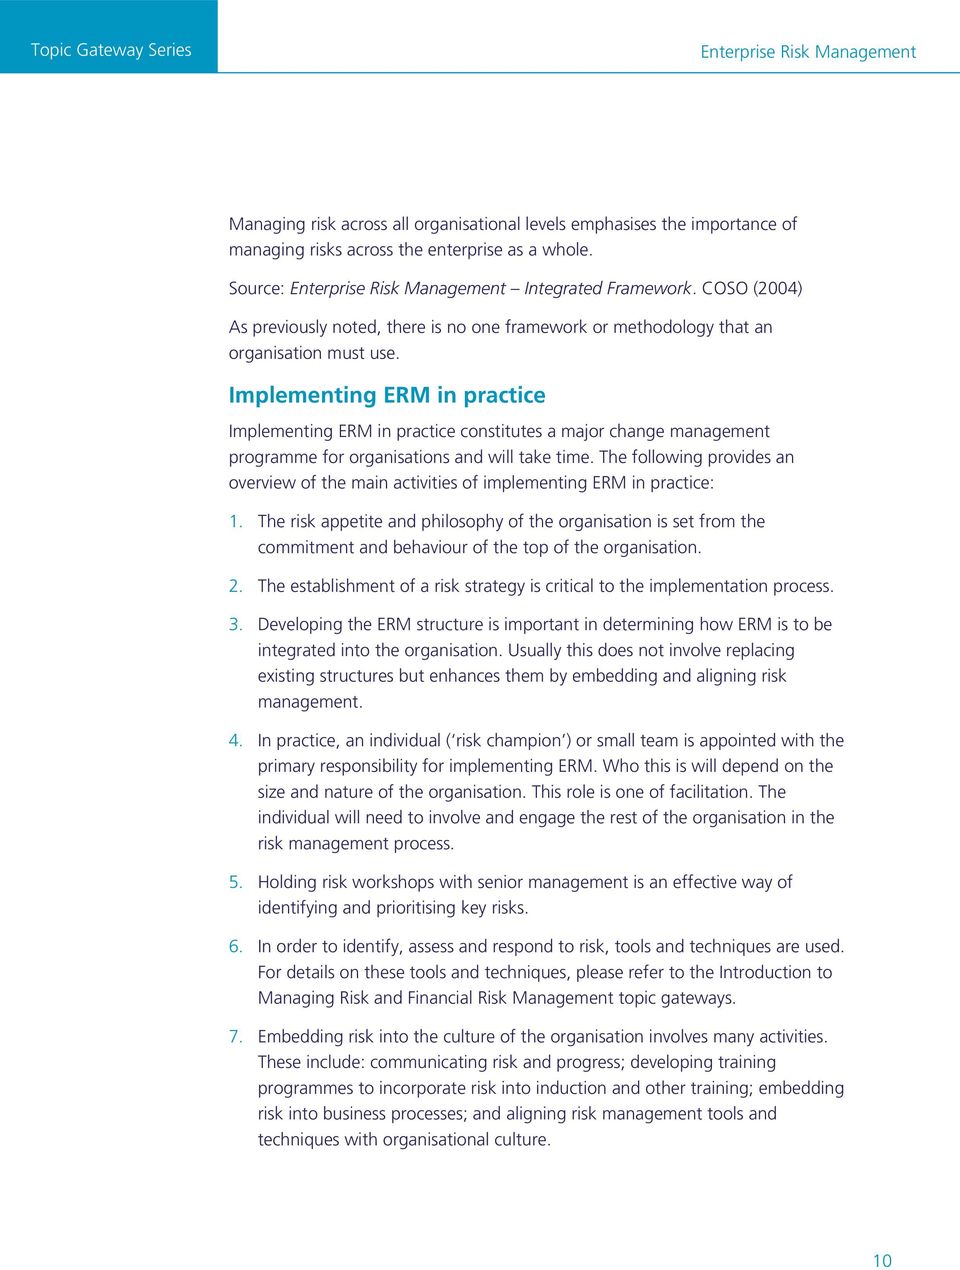 Implementing ERM in practice Implementing ERM in practice constitutes a major change management programme for organisations and will take time.